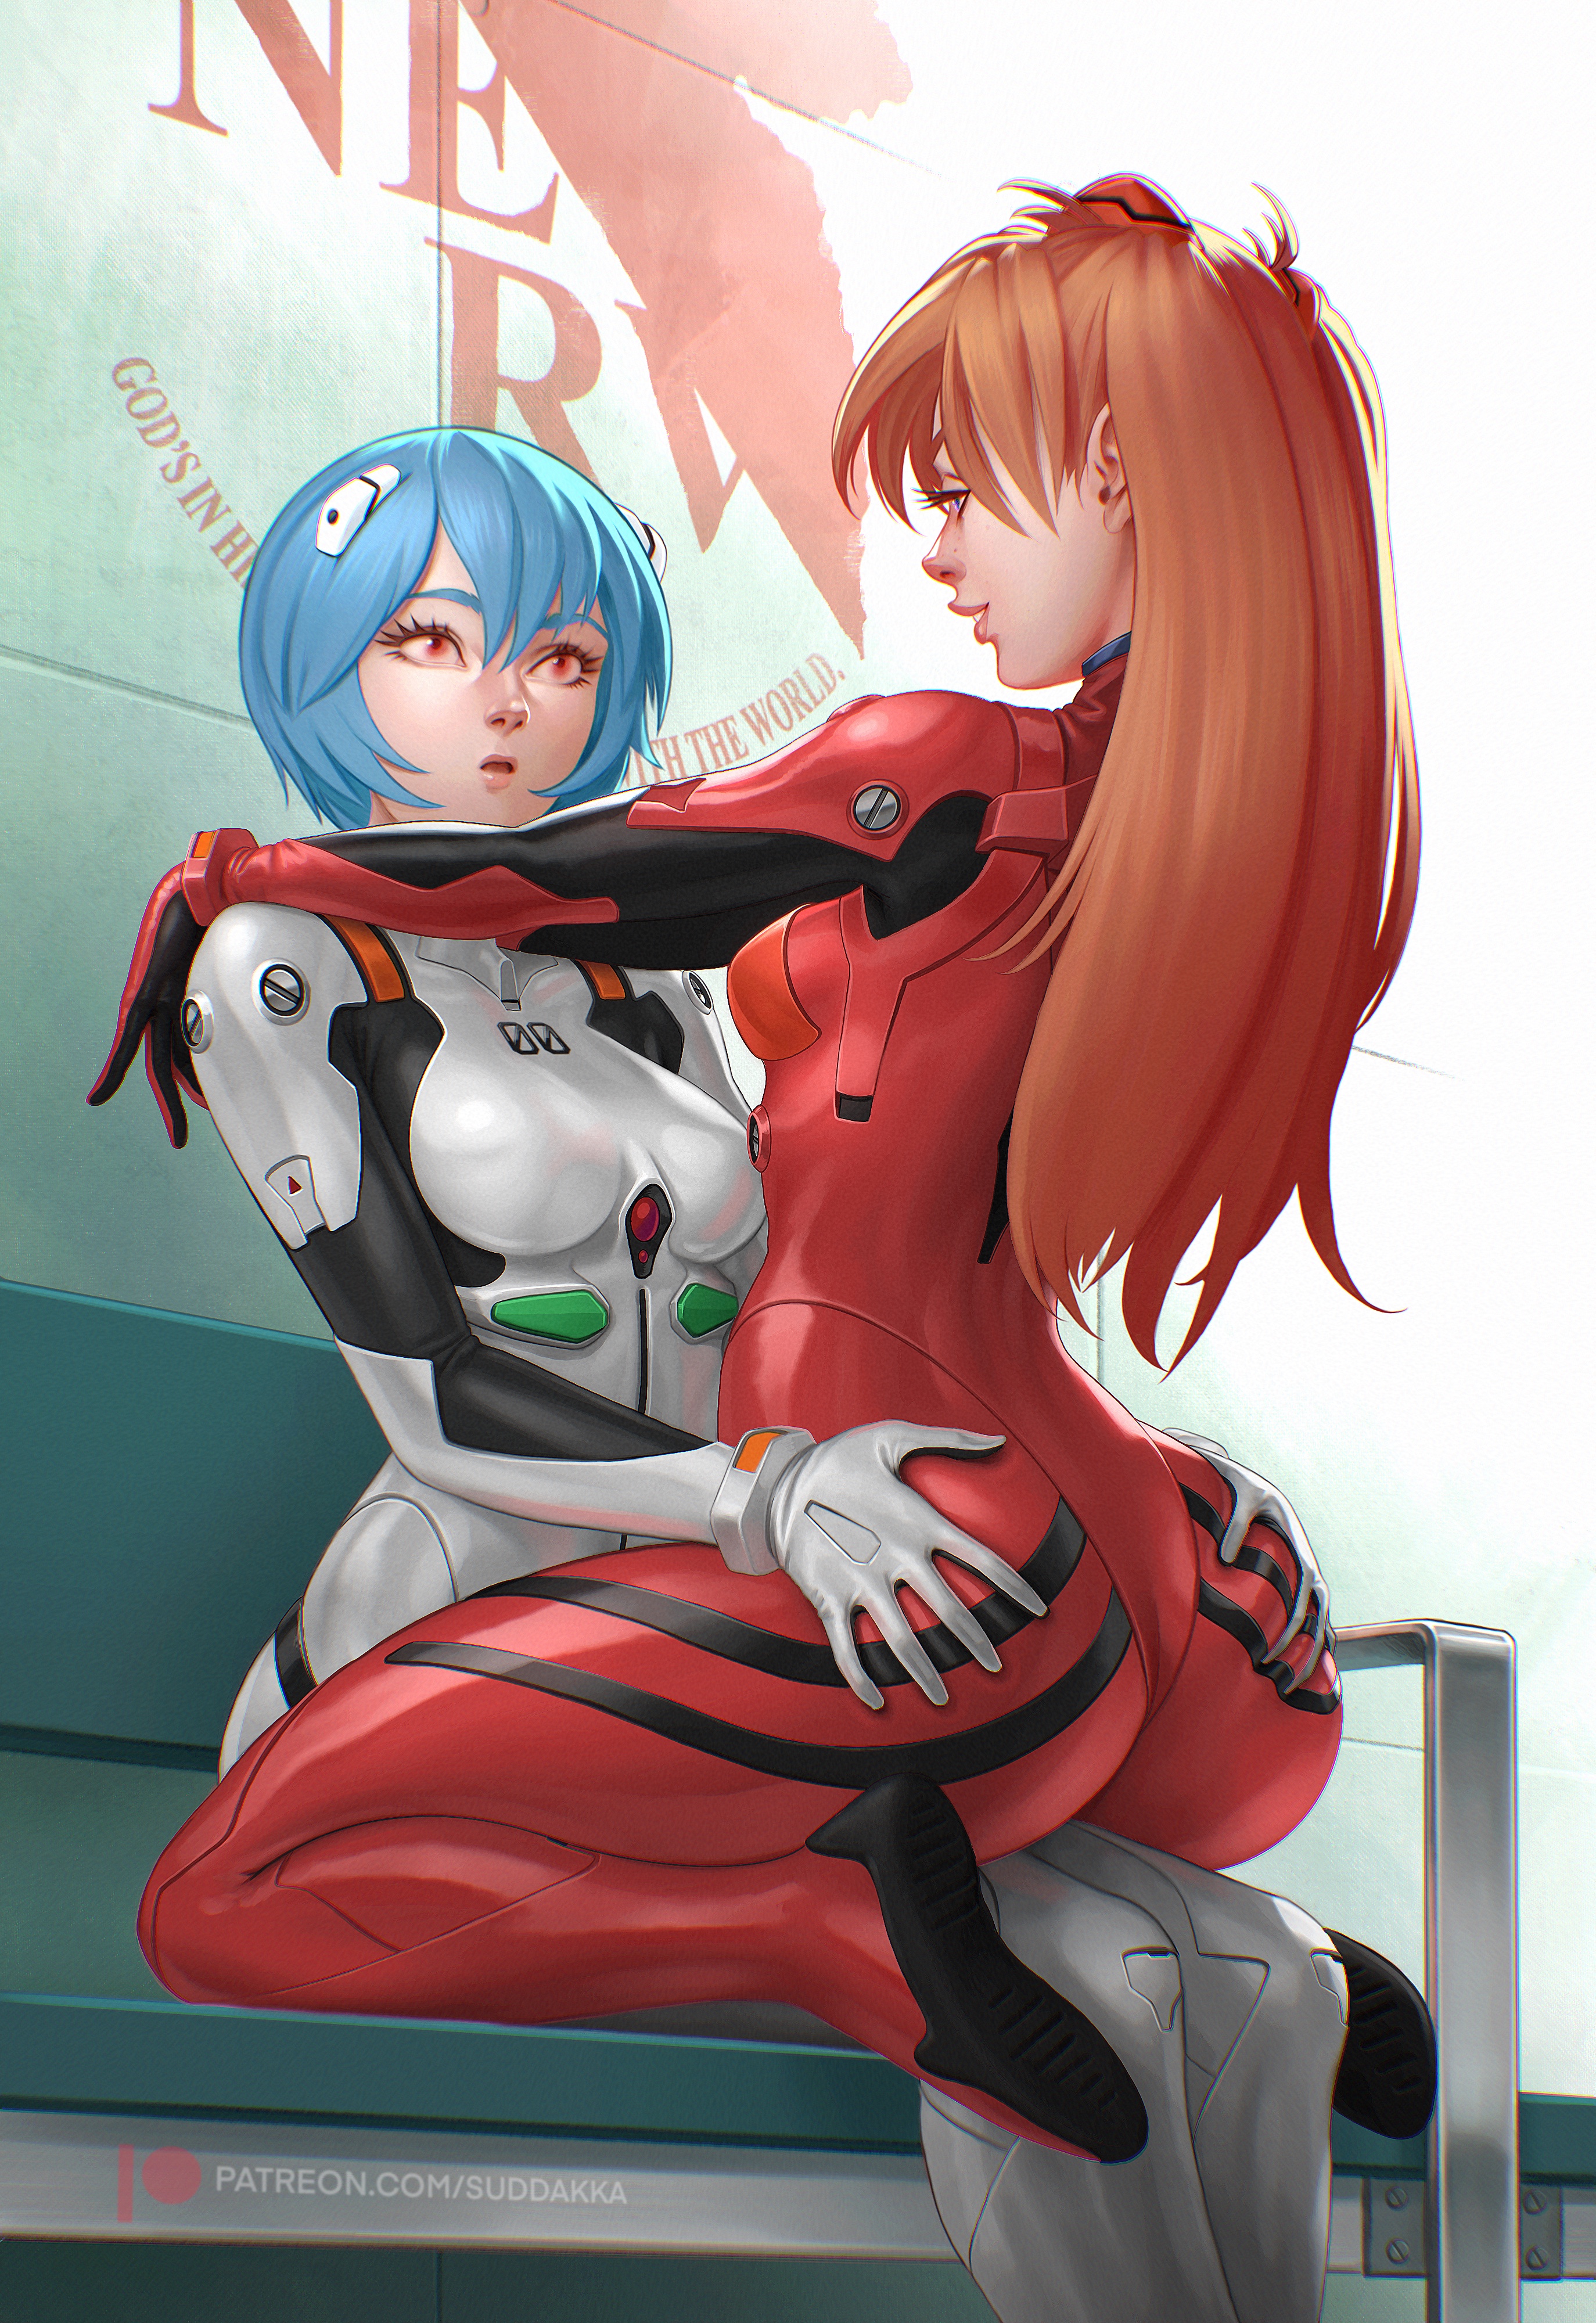 Anime 2748x4000 Suddakka Neon Genesis Evangelion Asuka Langley Soryu Ayanami Rei hands on ass plugsuit blue hair frontal view rear view long hair short hair sitting sitting backwards multiple characters anime girls looking away blue eyes red eyes freckles on bench watermarked thighs whole body bent legs girl sitting on girl profile parted lips spread legs straddling straight hair kneeling